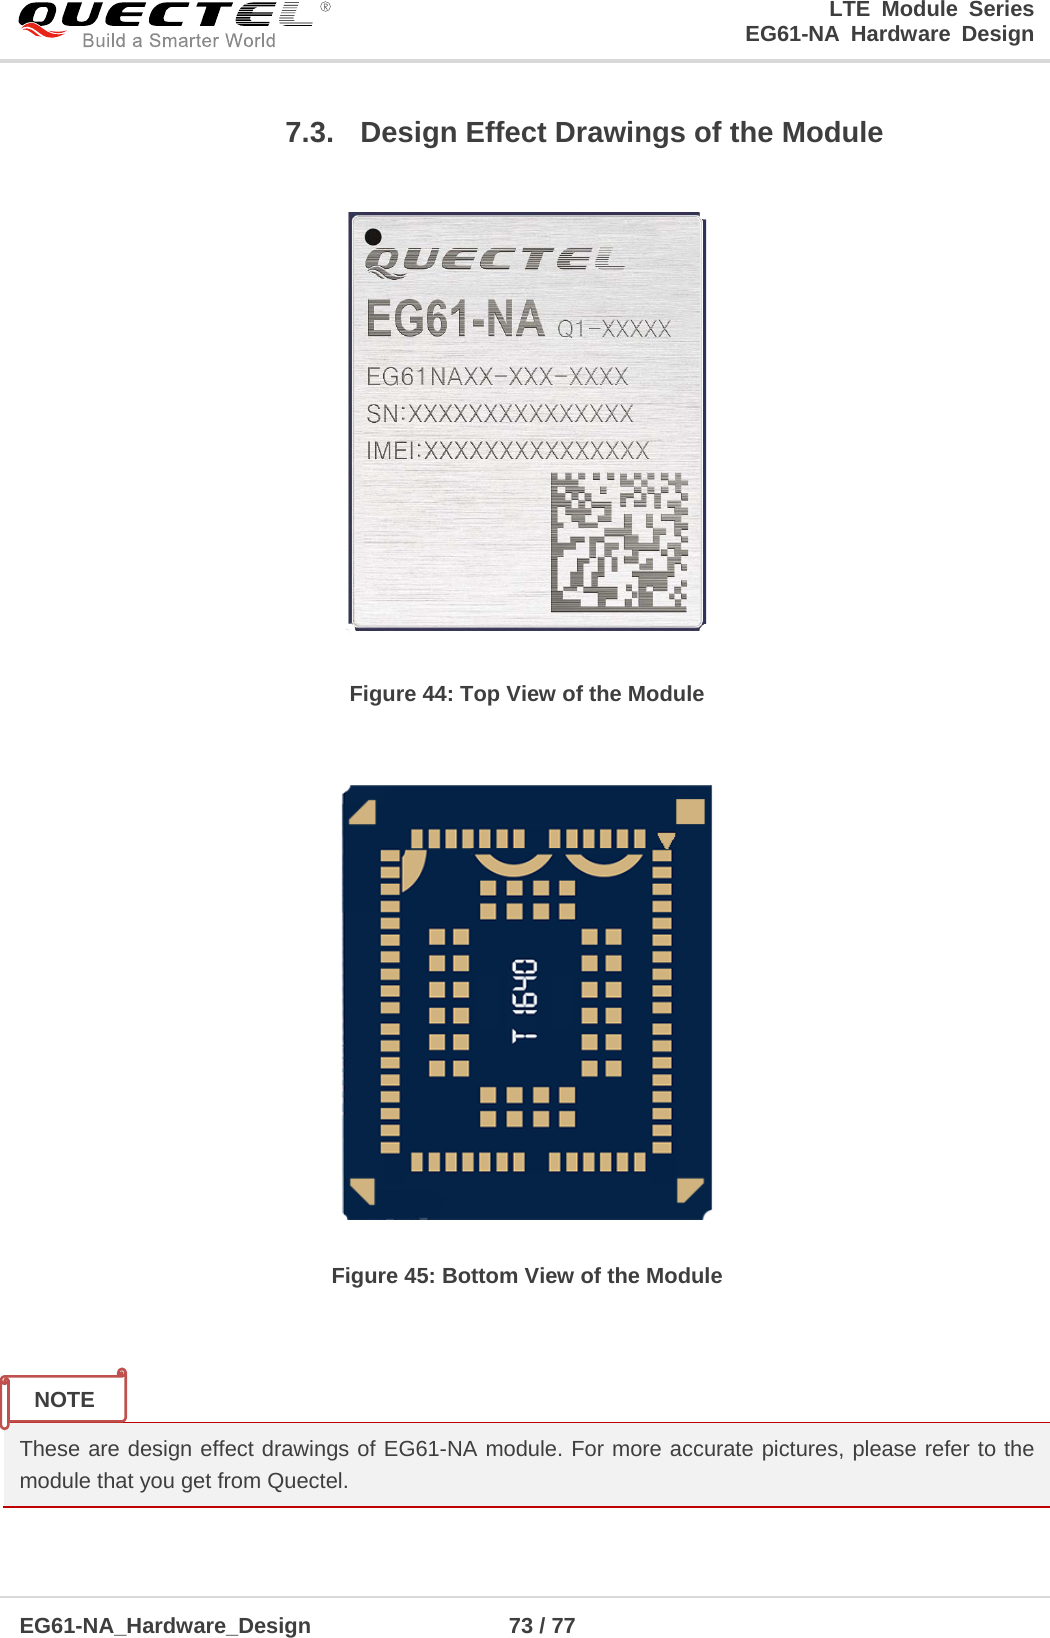 LTE Module Series                                                  EG61-NA Hardware Design  EG61-NA_Hardware_Design                  73 / 77    7.3. Design Effect Drawings of the Module  Figure 44: Top View of the Module   Figure 45: Bottom View of the Module   These are design effect drawings of EG61-NA module. For more accurate pictures, please refer to the module that you get from Quectel. NOTE 